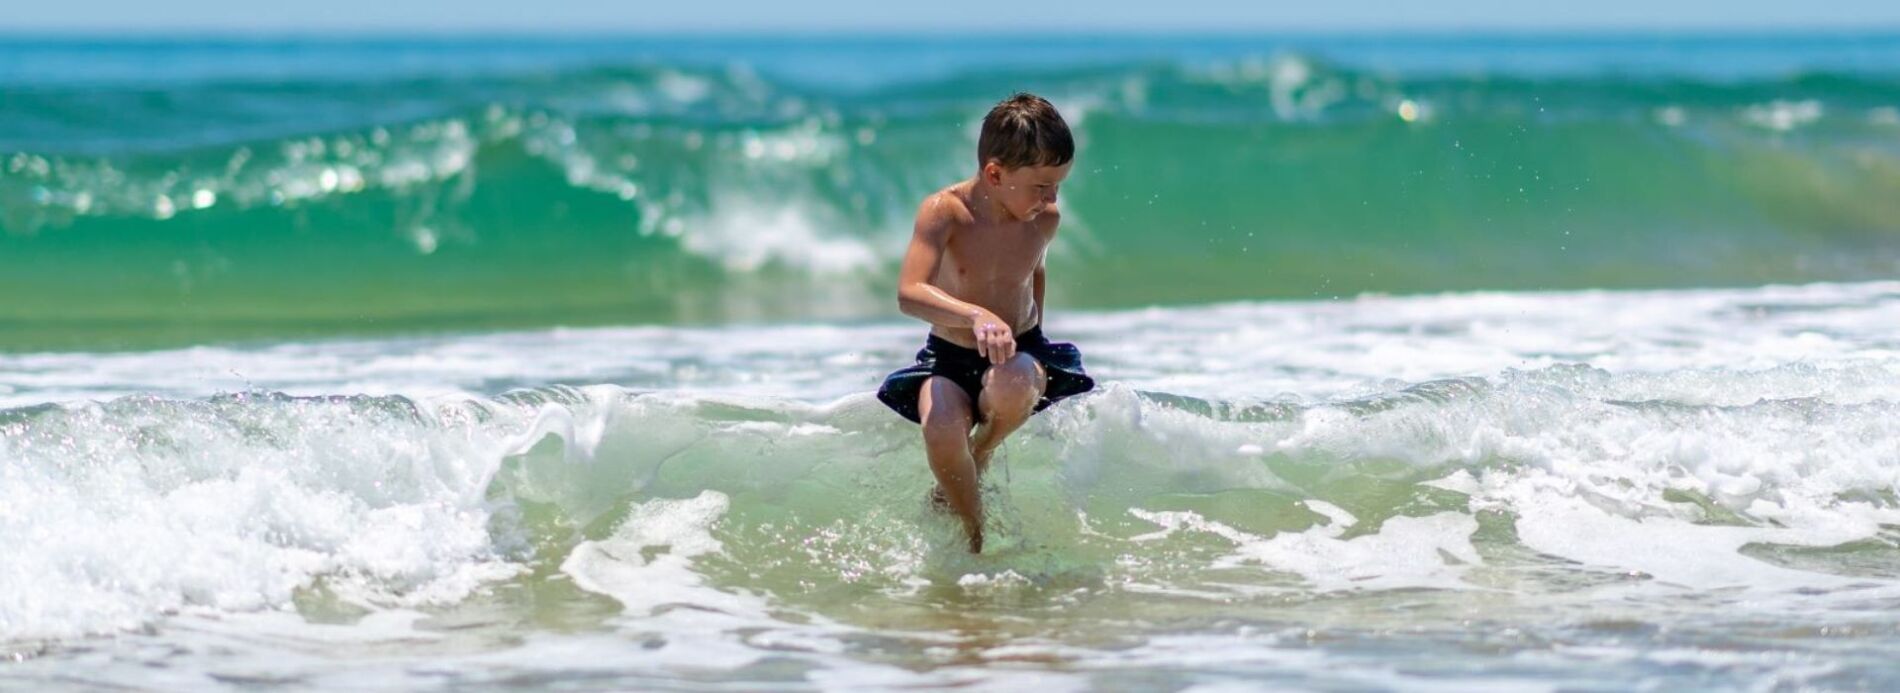 kid jumping in waves